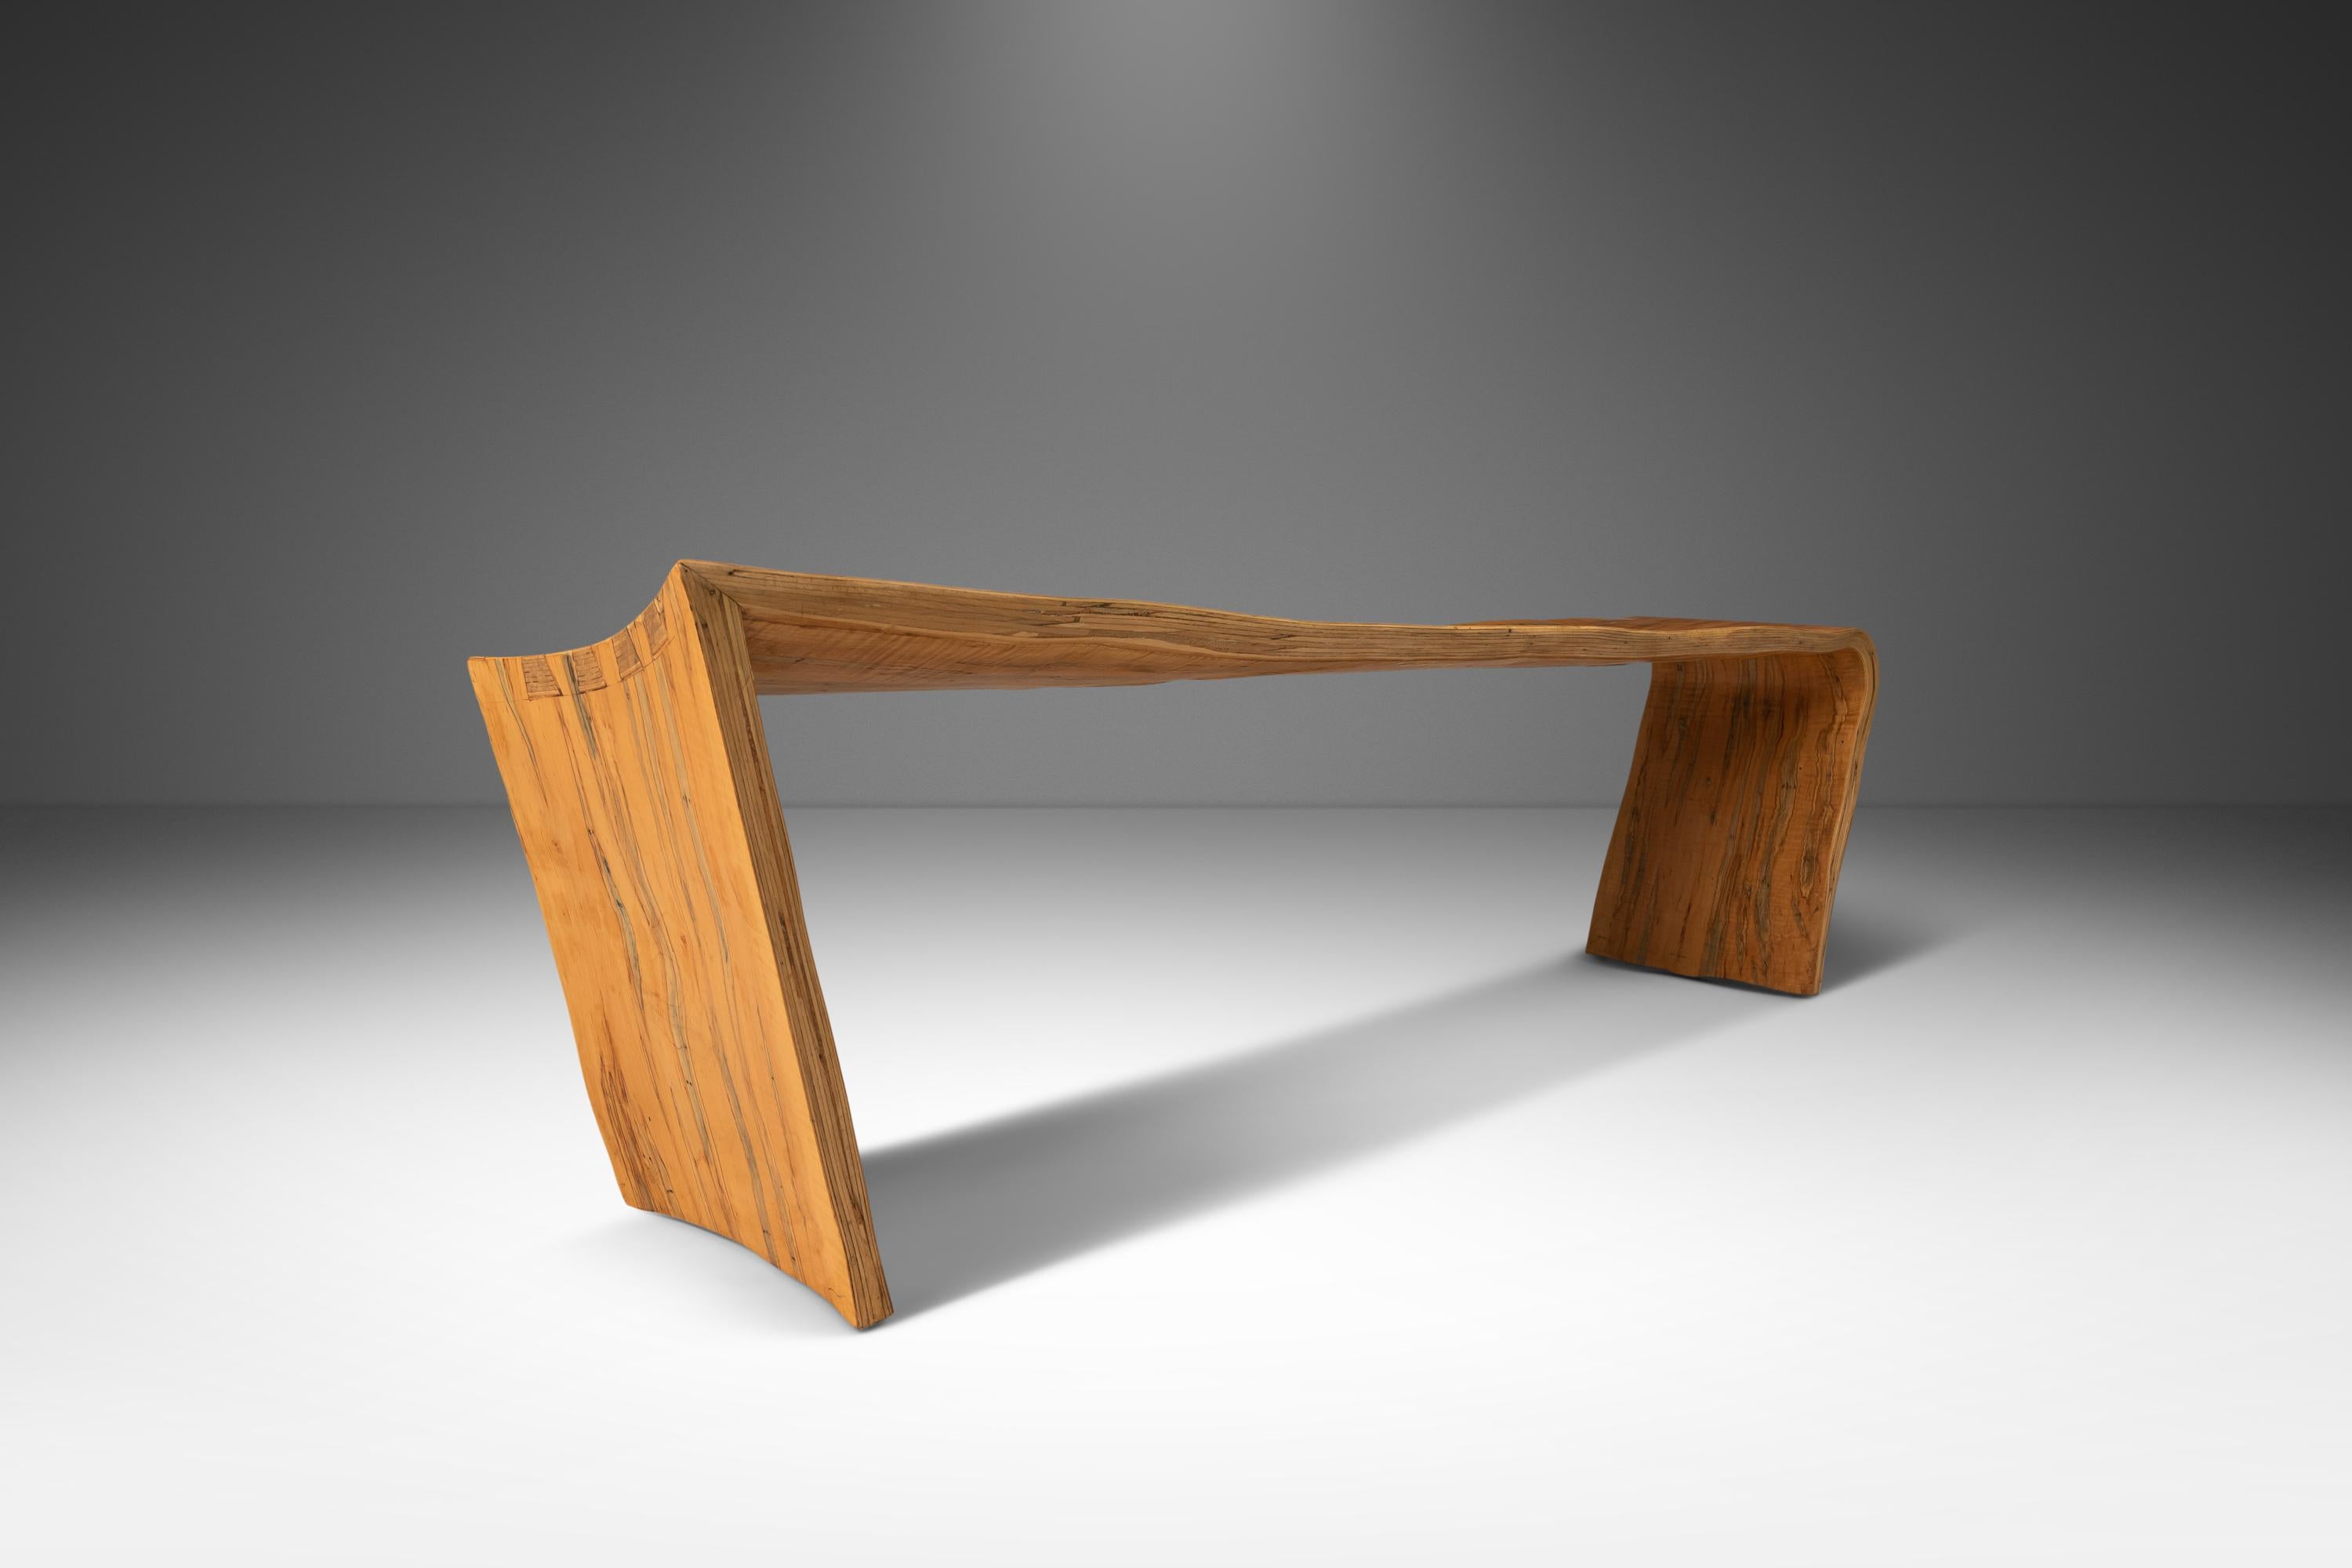 Bentwood Asymmetrical Abstract Three Seater Bench in Ambrosia Maple, Usa, 1980s For Sale 2